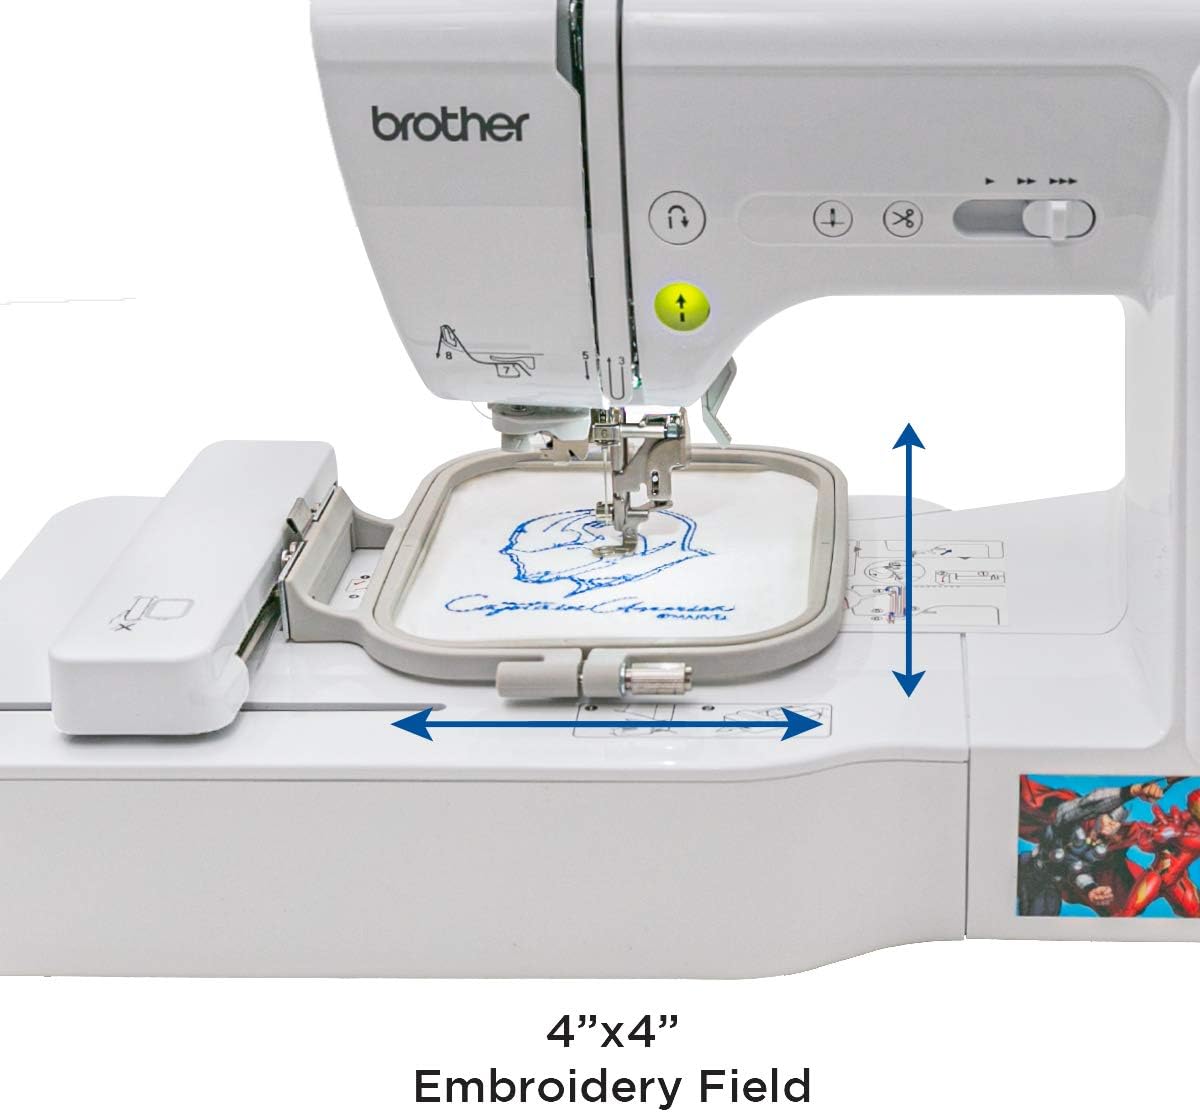 Brother Sewing and Embroidery Machine Review